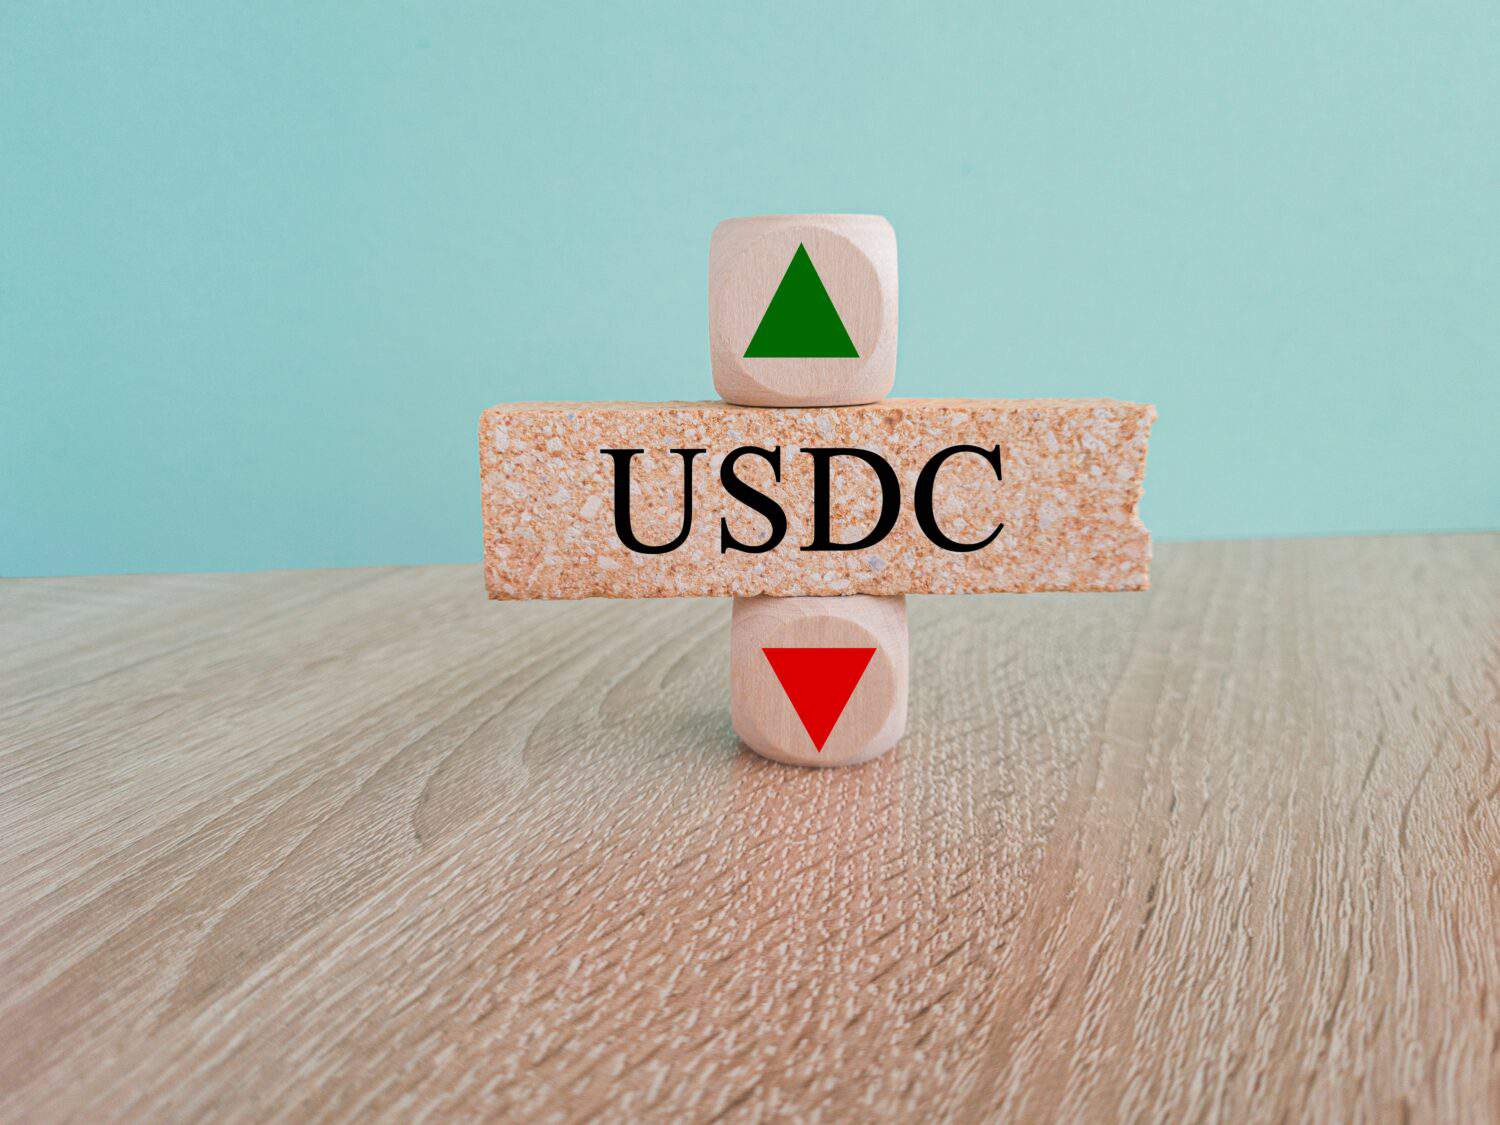 USDC price symbol. A brick block with arrow symbolizing that USD coin index price are going down or up. Beautiful wooden table blue background. Business and gold price concept. Copy space.